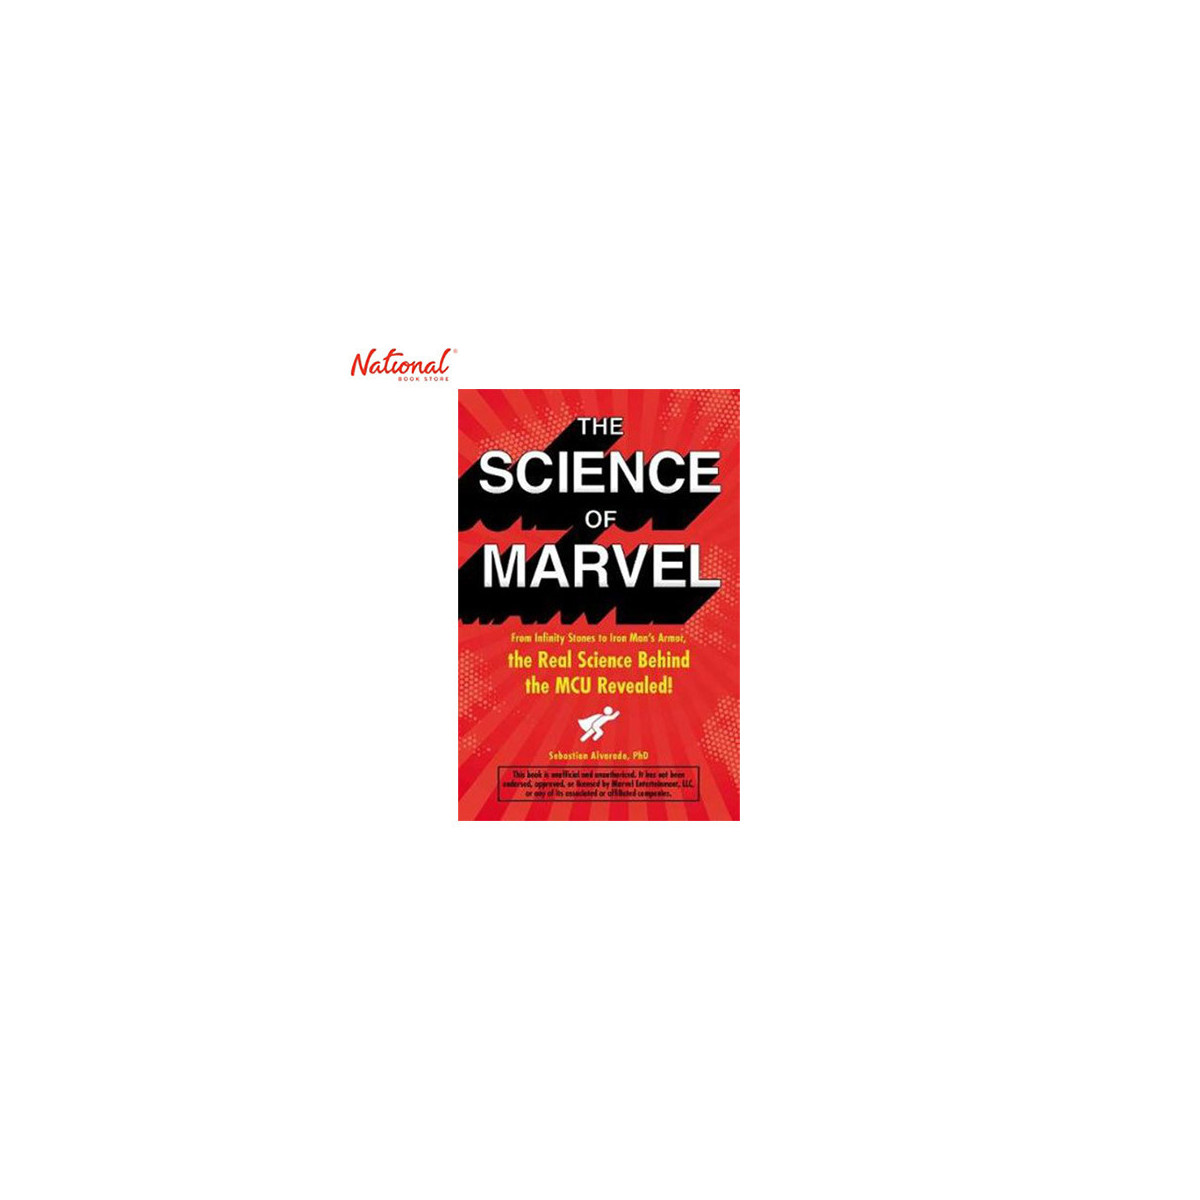 SCIENCE OF MARVEL: FROM INFINITY STONES TO IRON MAN'S ARMOR, THE REAL SCIENCE BEHIND THE MCU REVEALED! TRADE PAPERBACK